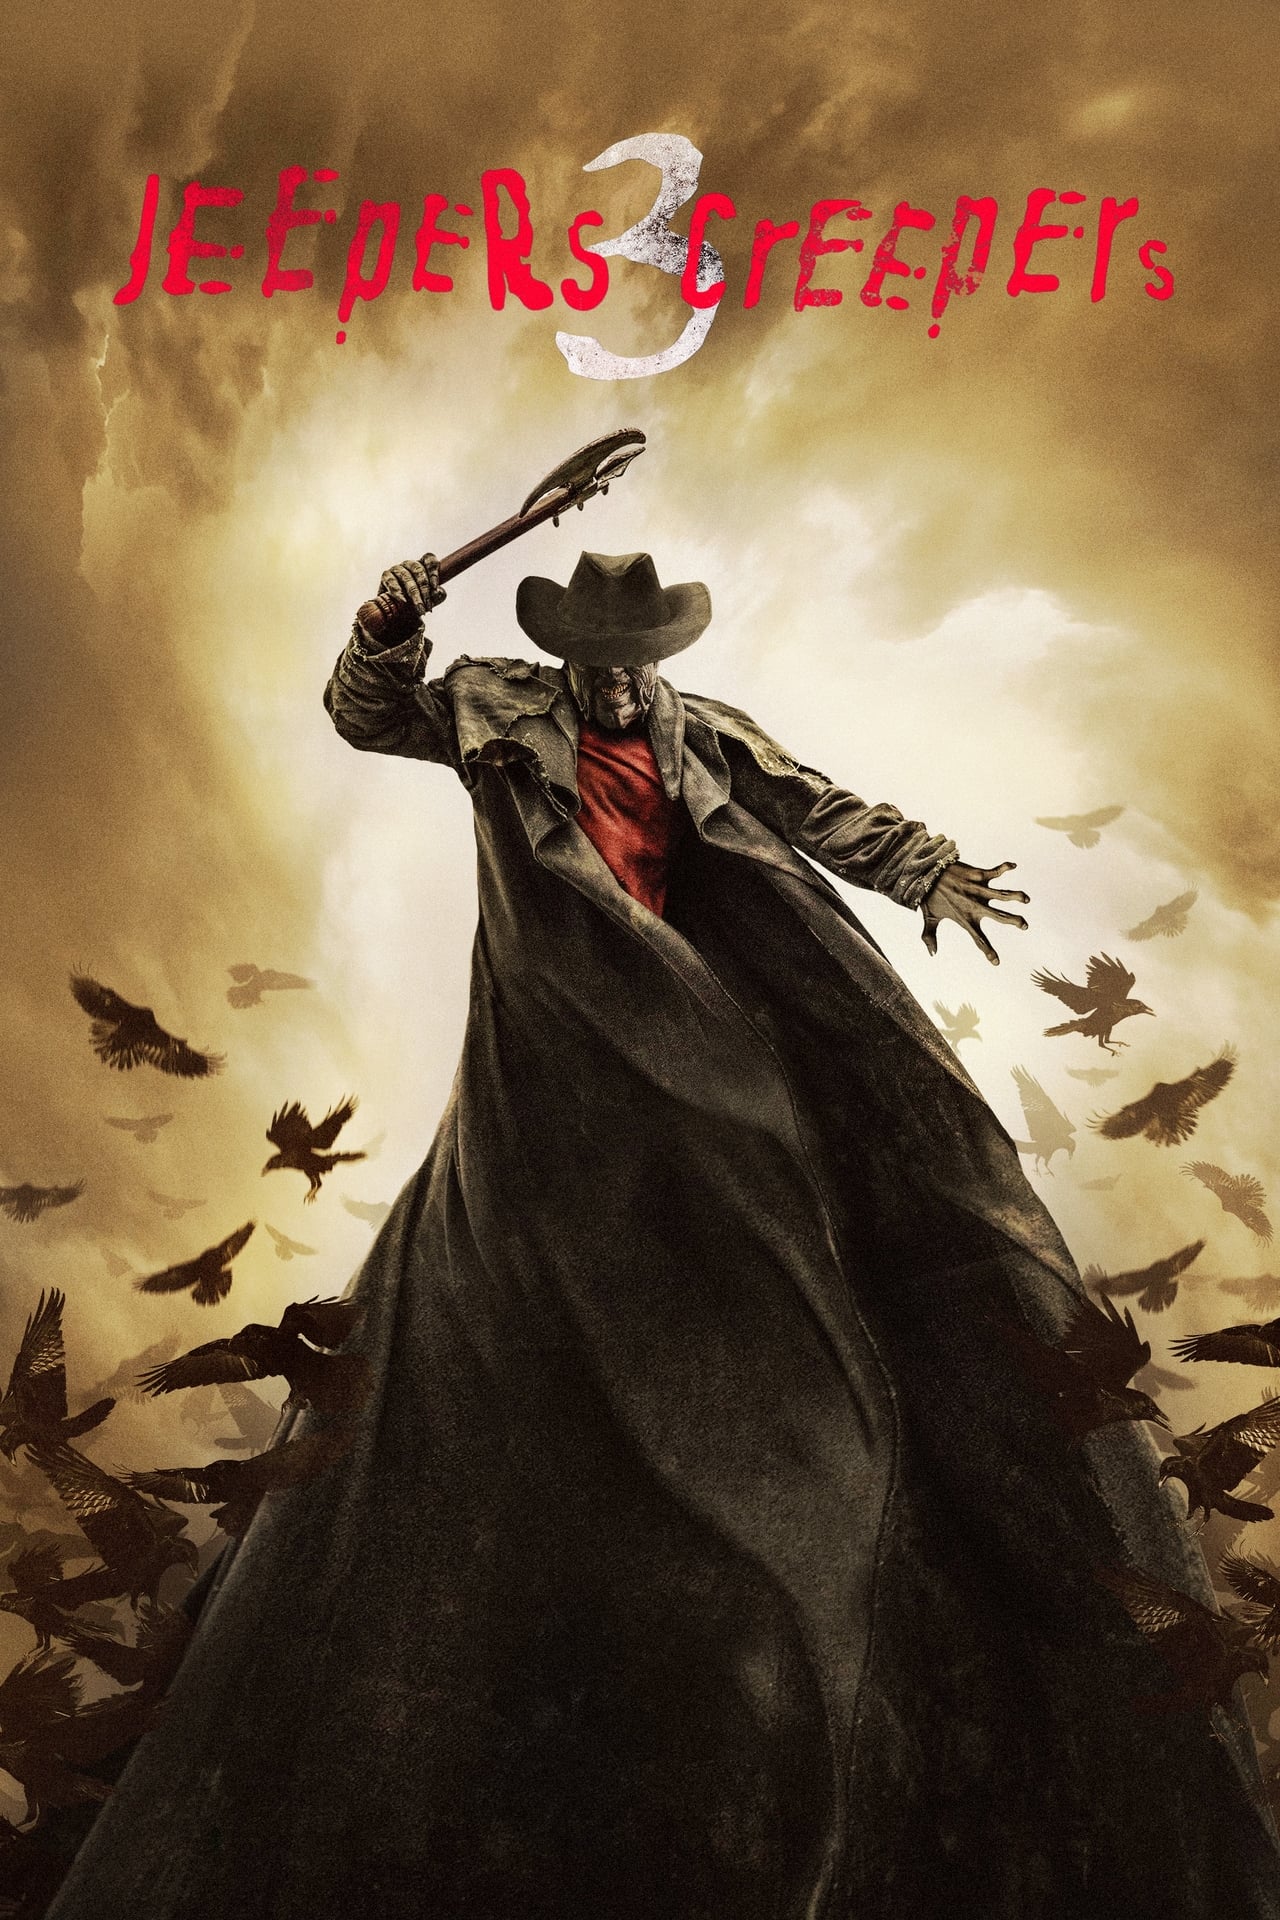 Jeepers Creepers 3 (Theatrical Edition) wiki, synopsis, reviews, watch ...
